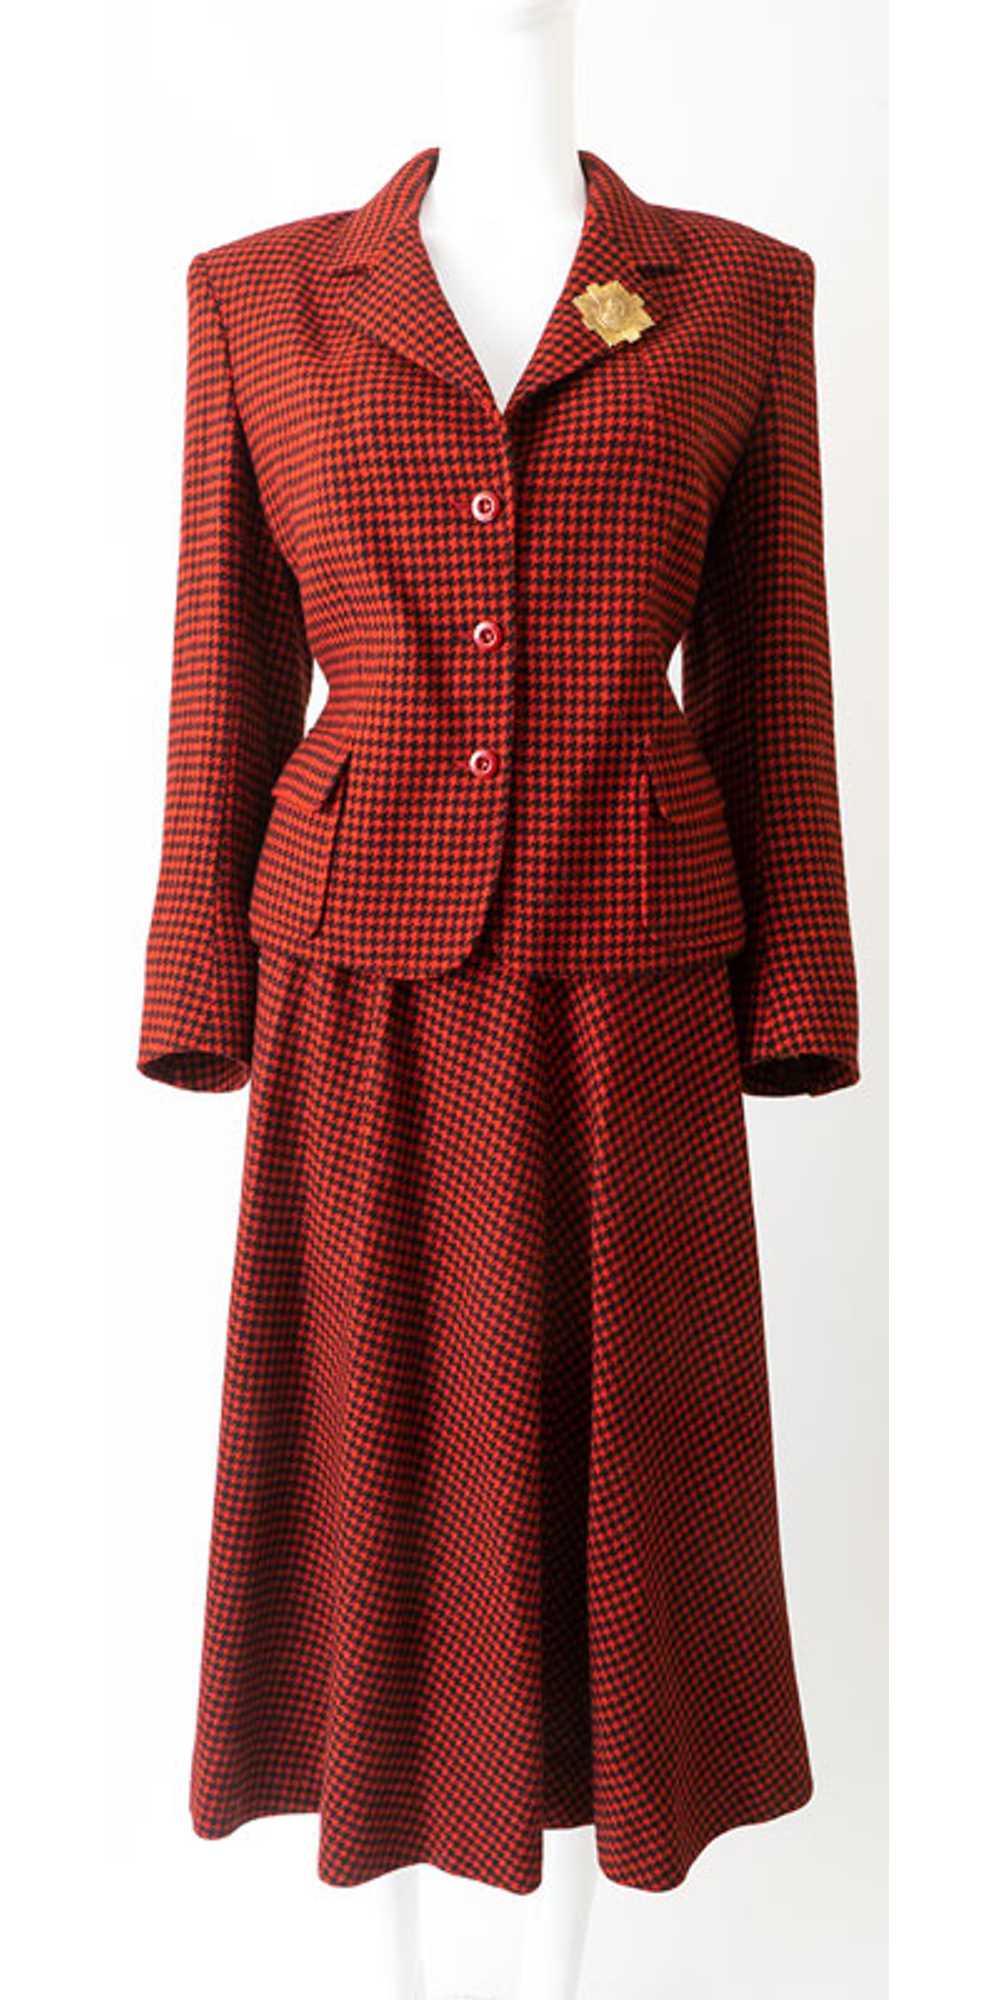 Fab 80s Jaeger Houndstooth Outfit - image 2